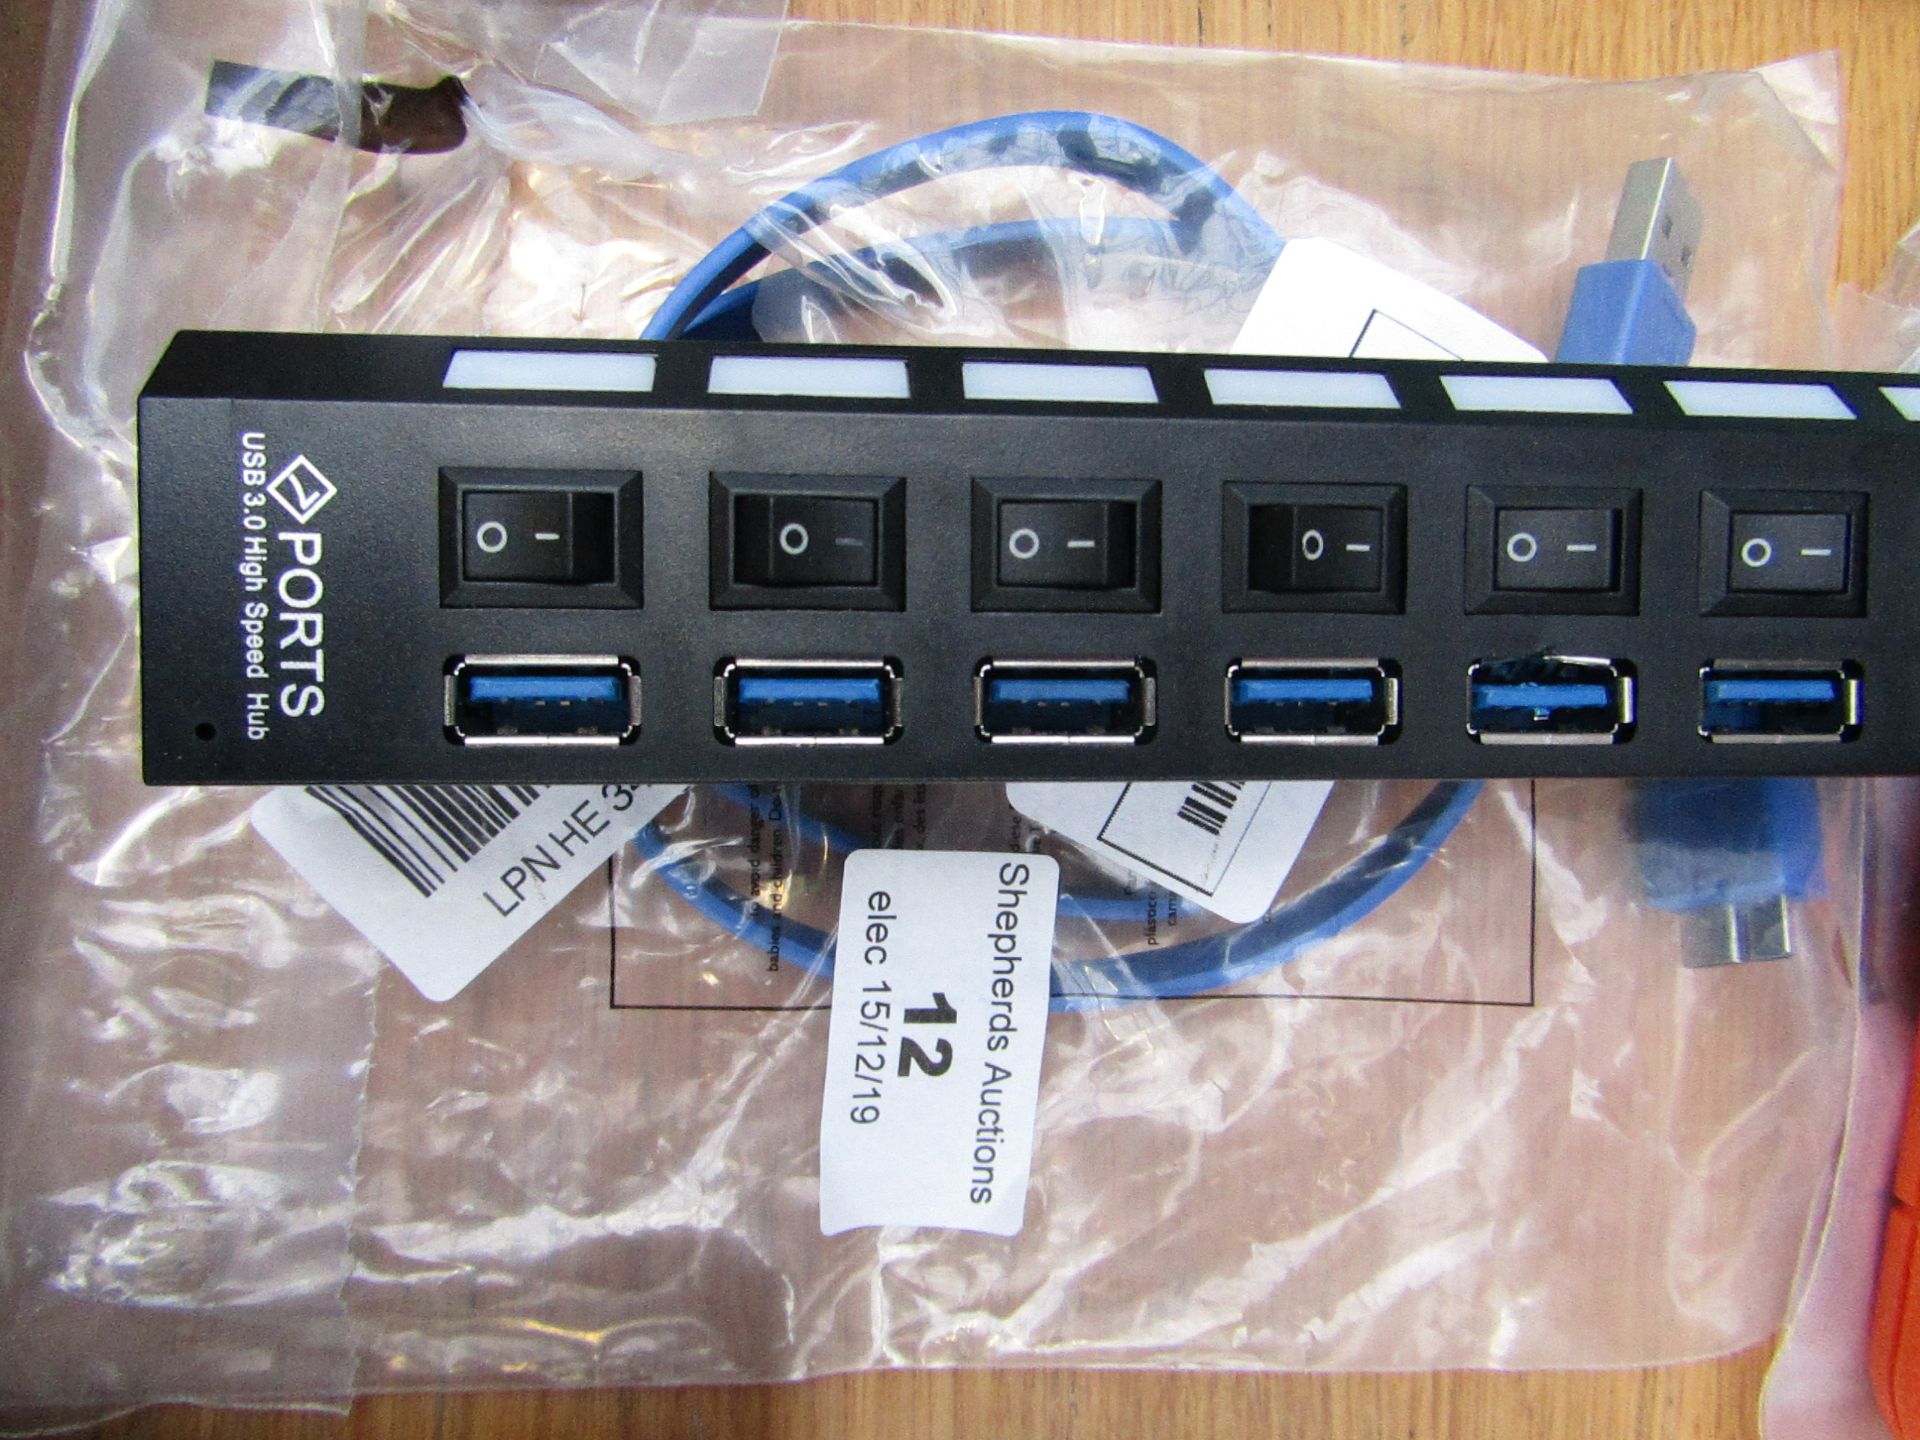 PORTS - 7 port, USB with sitches 3.0 High speed hub, untested.